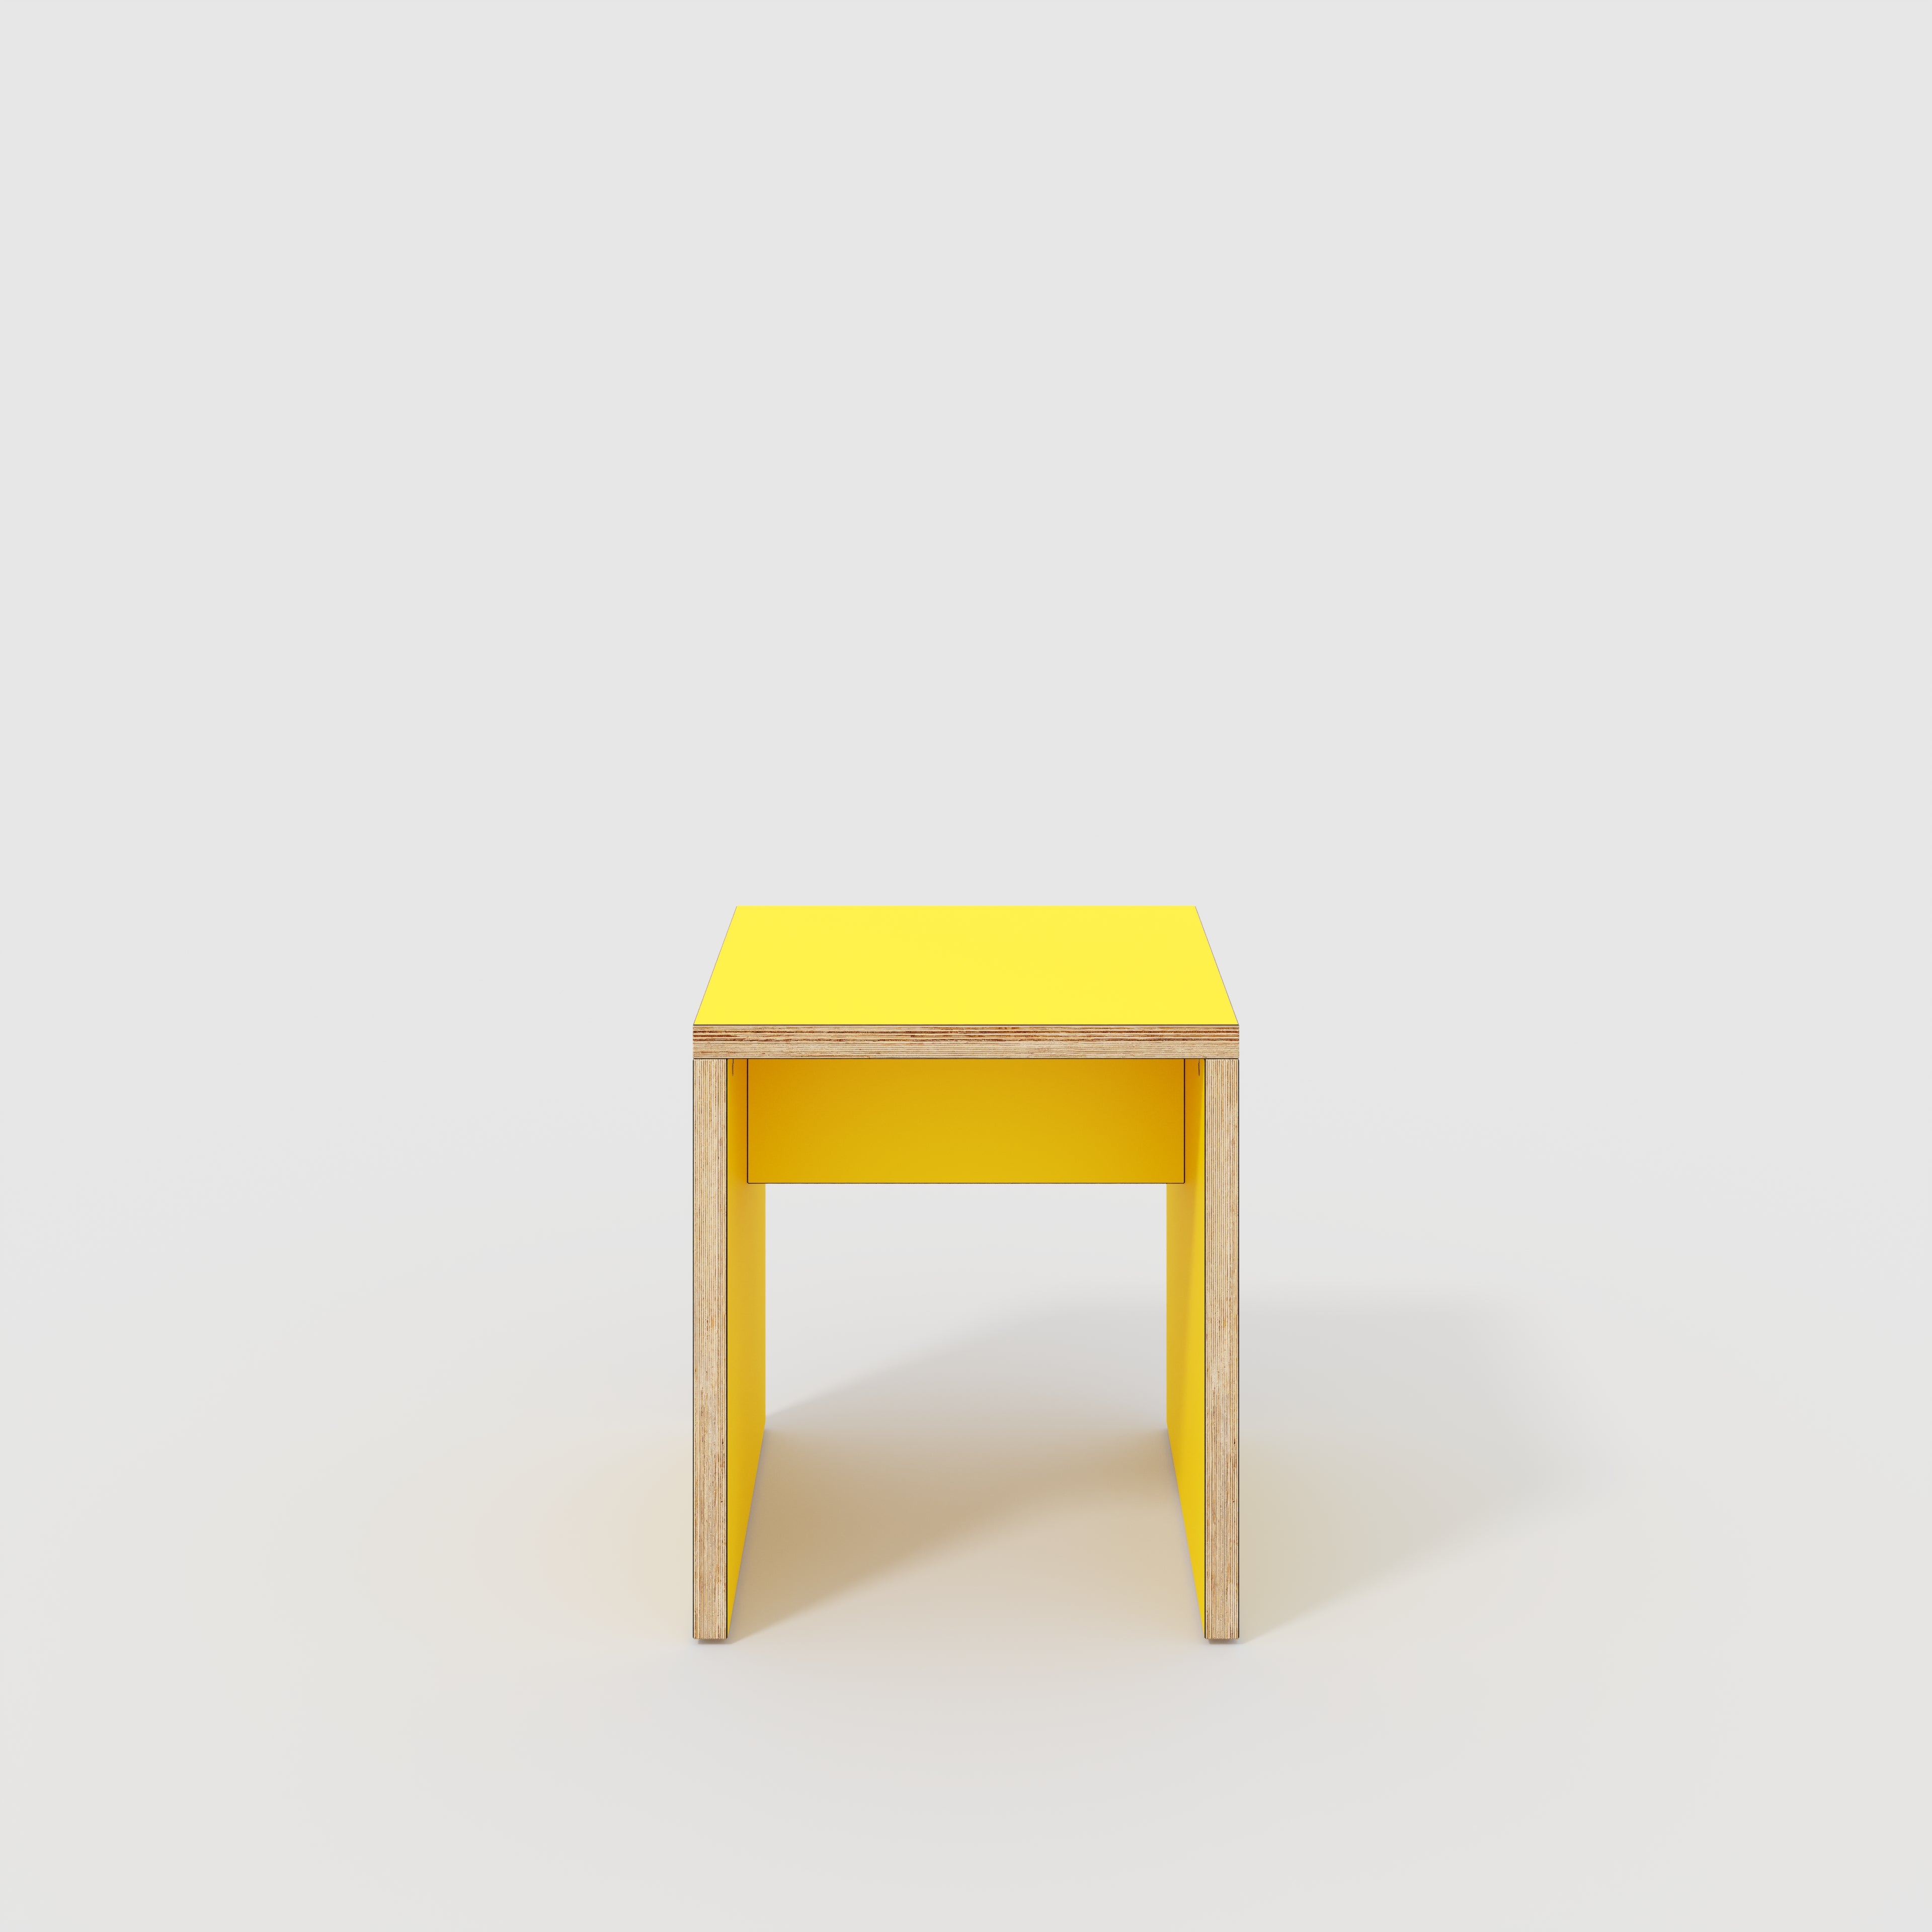 Stool with Solid Sides - Formica Chrome Yellow - 400(w) x 400(d) x 450(h)